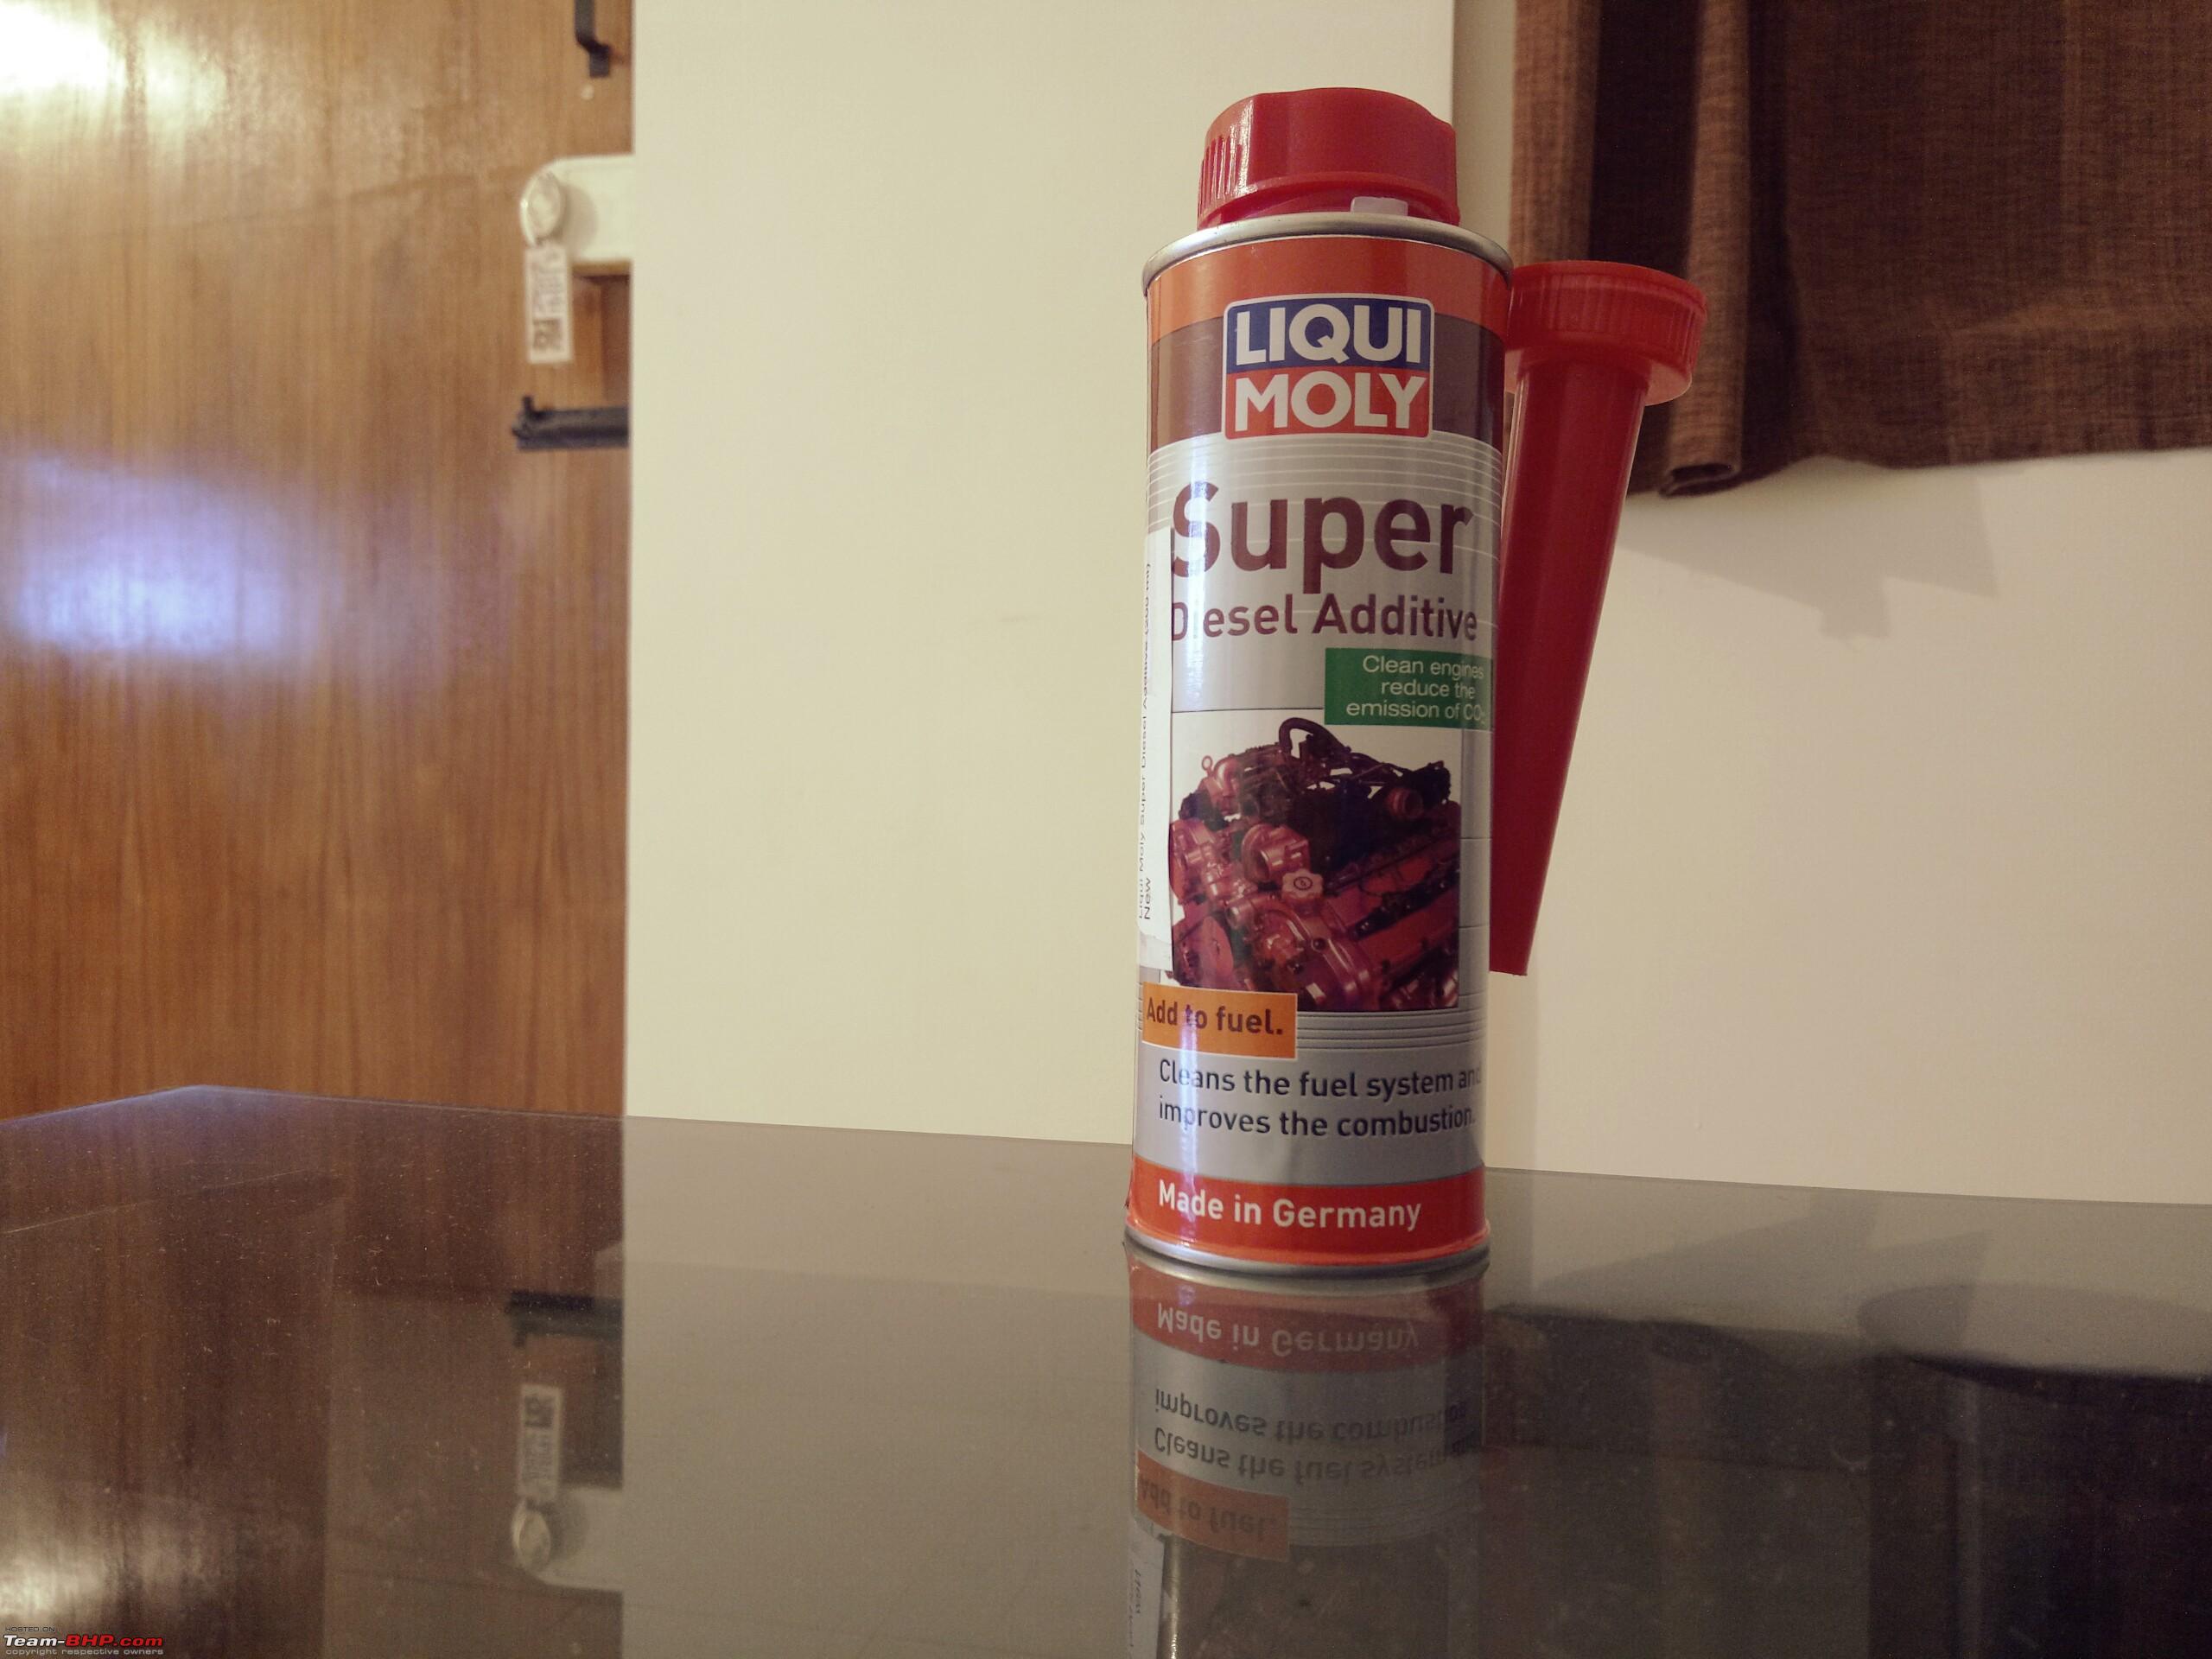 Liquimoly Super Diesel Additive  how to use and benefits 